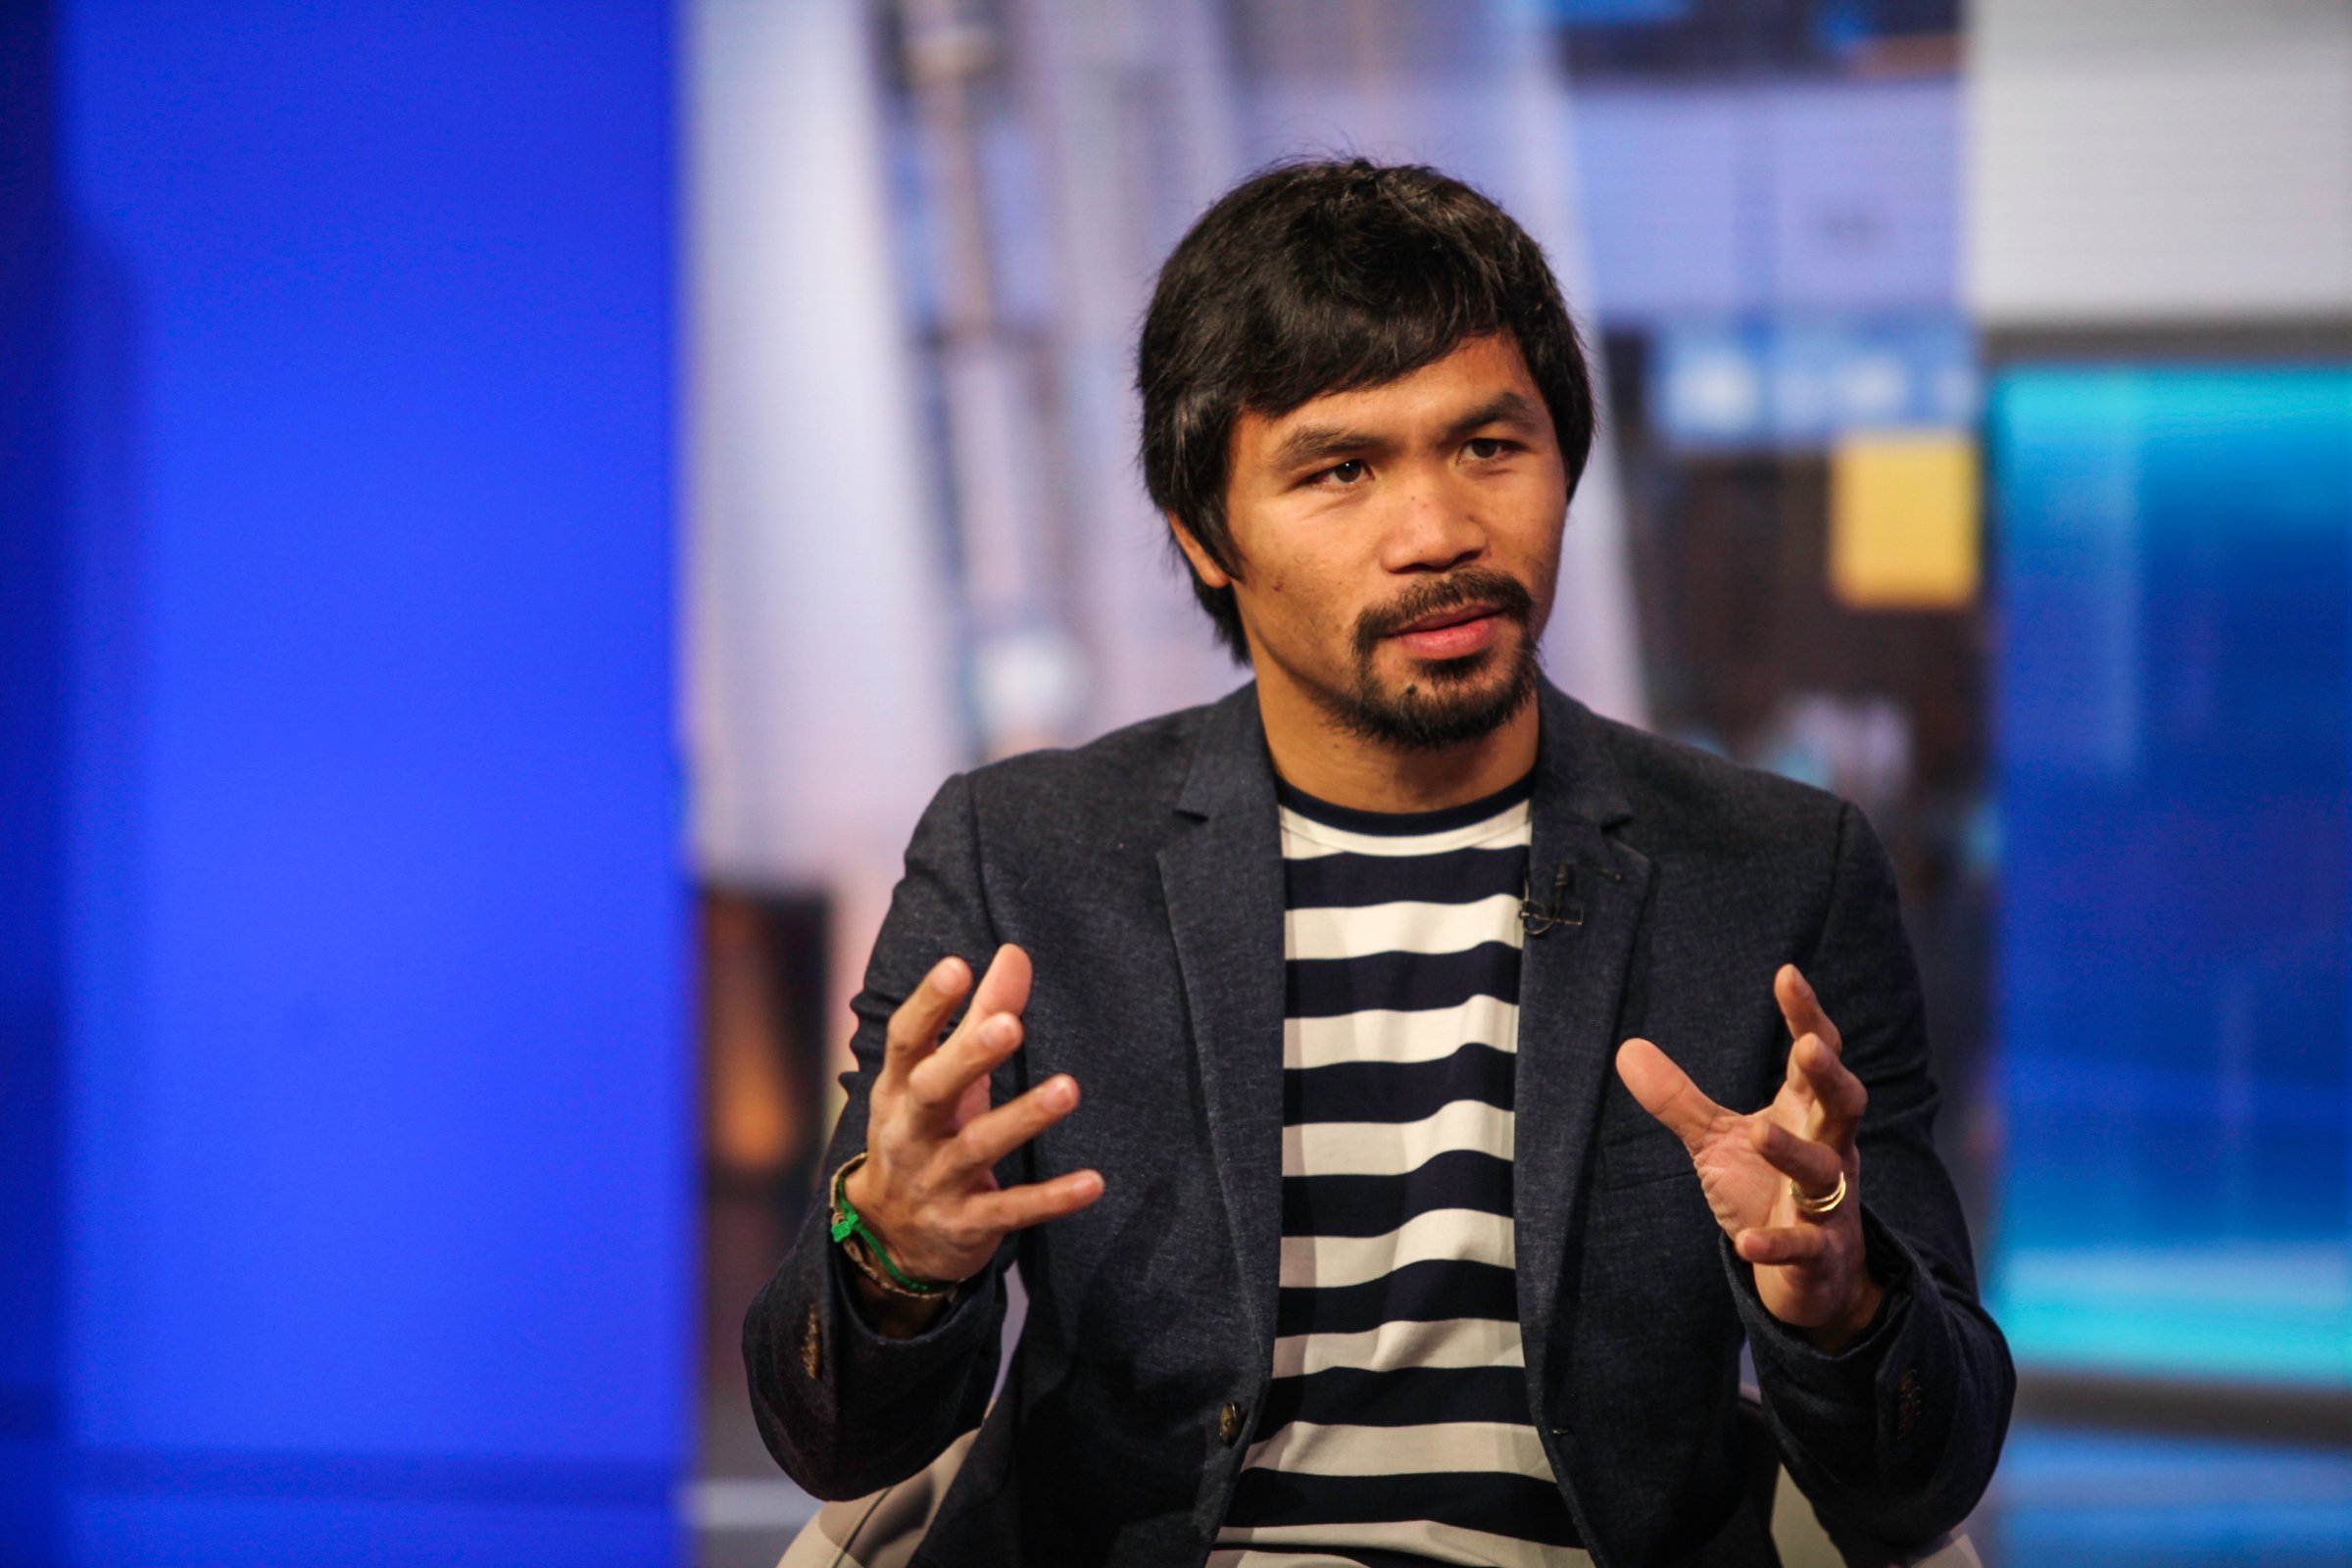 Professional boxer Manny Pacquiao speaks during a Bloomberg Television interview in New York, U.S., on Tuesday, Oct. 13, 2015. Pacquiao discussed his career as a boxer and politician and what motivates him to do charity work. Photographer: Chris Goodney/Bloomberg *** Local Caption *** Manny Pacquiao